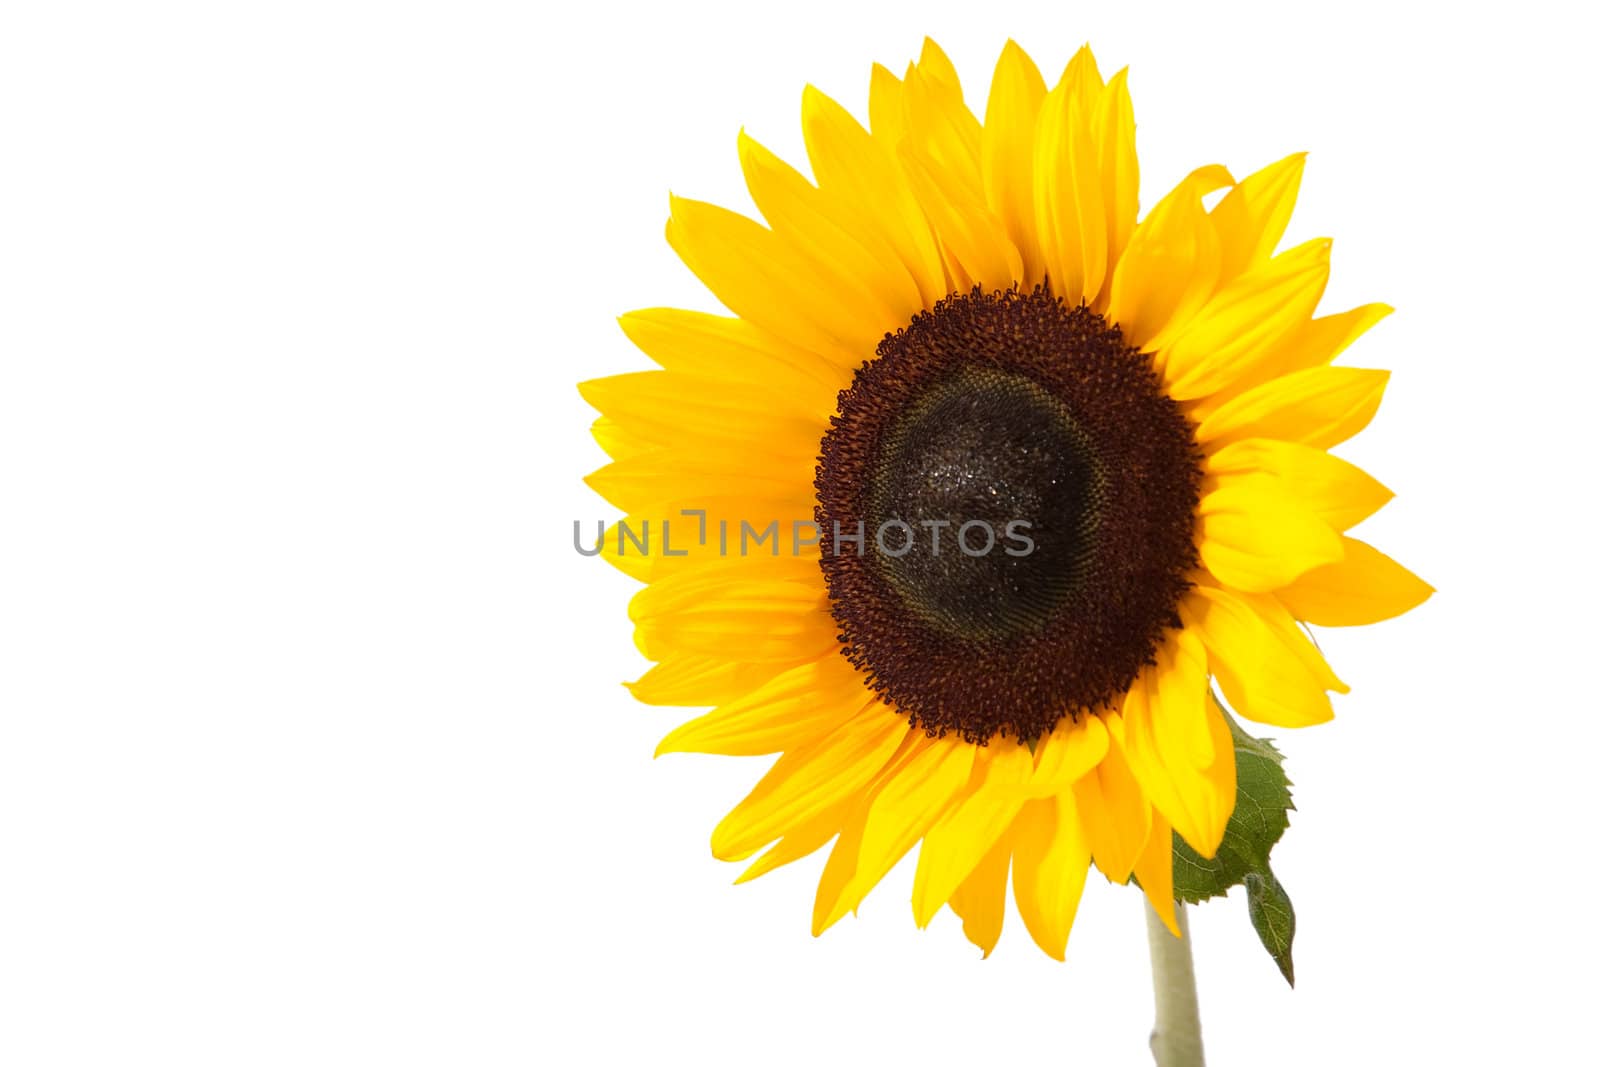 Sunny yellow sunflower isolated over white with green leaves